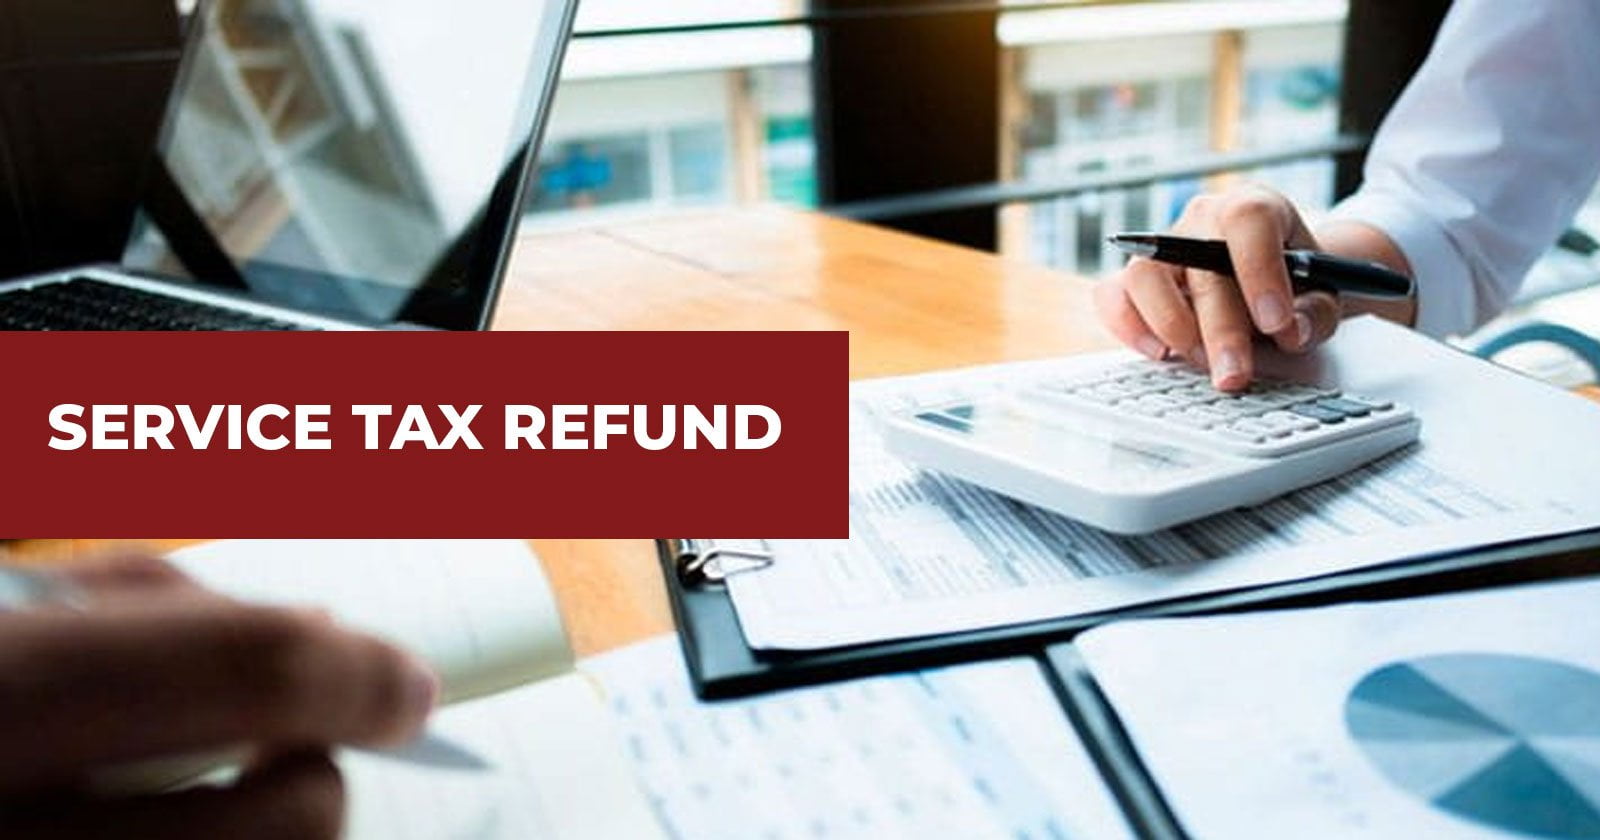 Refund - CESTAT - Refund of Service Tax - Banking and Financial Services - taxscan